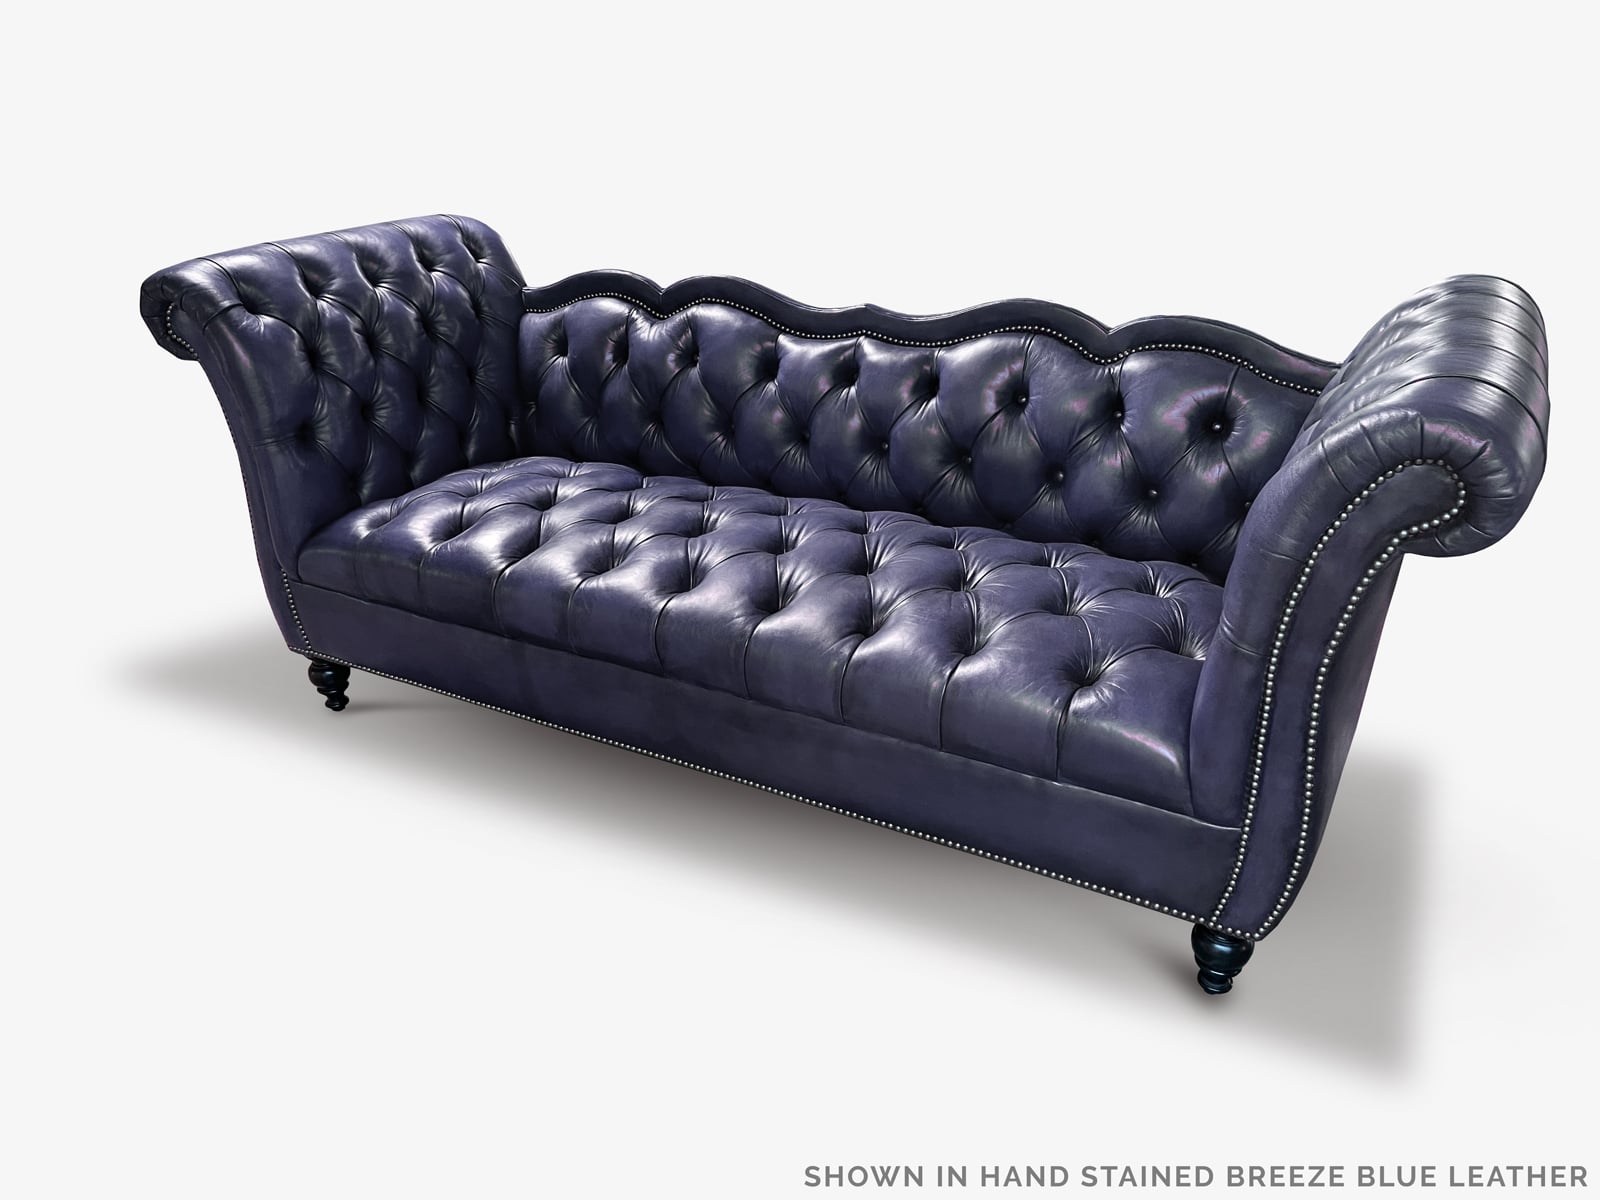 The Collins Custom Built Vintage Hand-Stained Breeze Blue Chesterfield Sofa